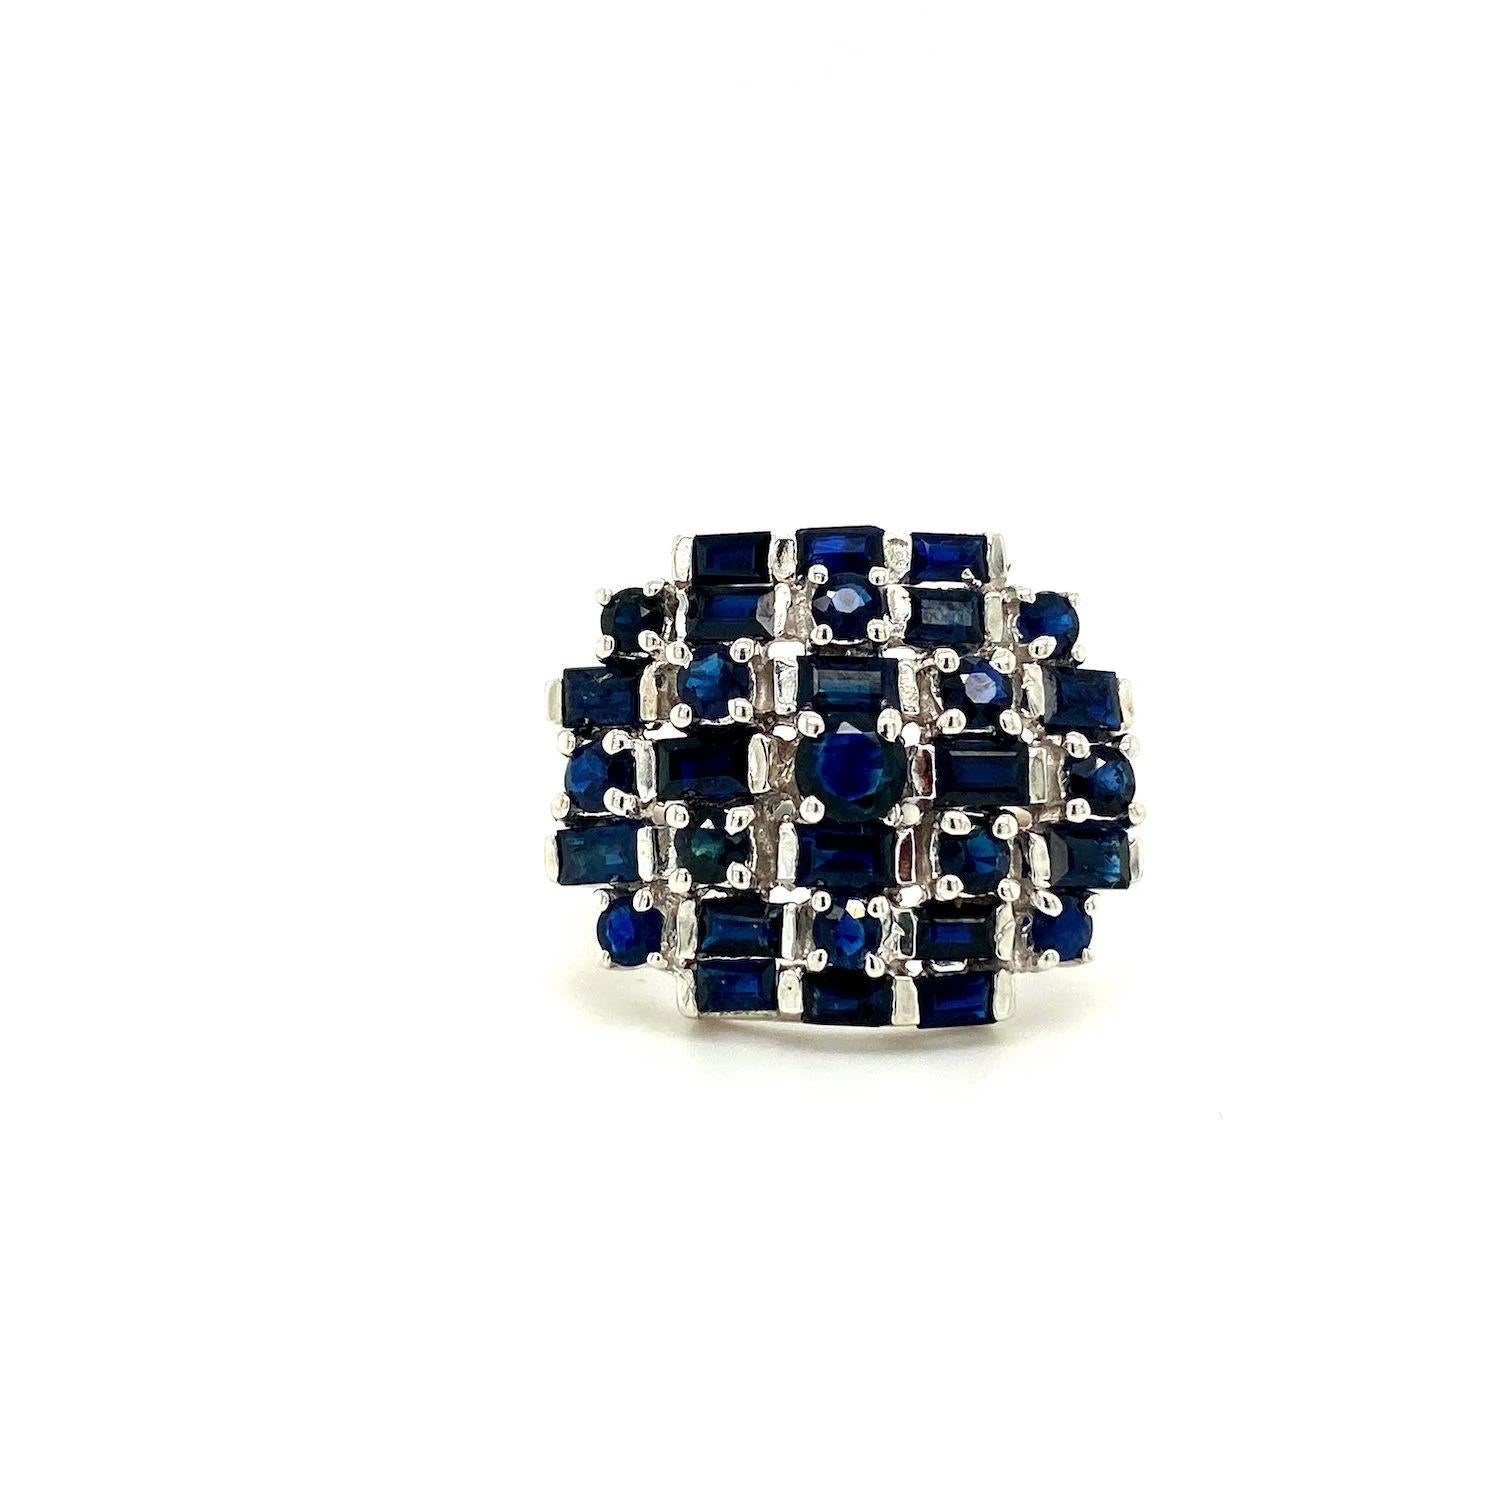 For Sale:  Statement 3.41 ct Blue Sapphire Cluster Bombe Ring 925 Sterling Silver 2